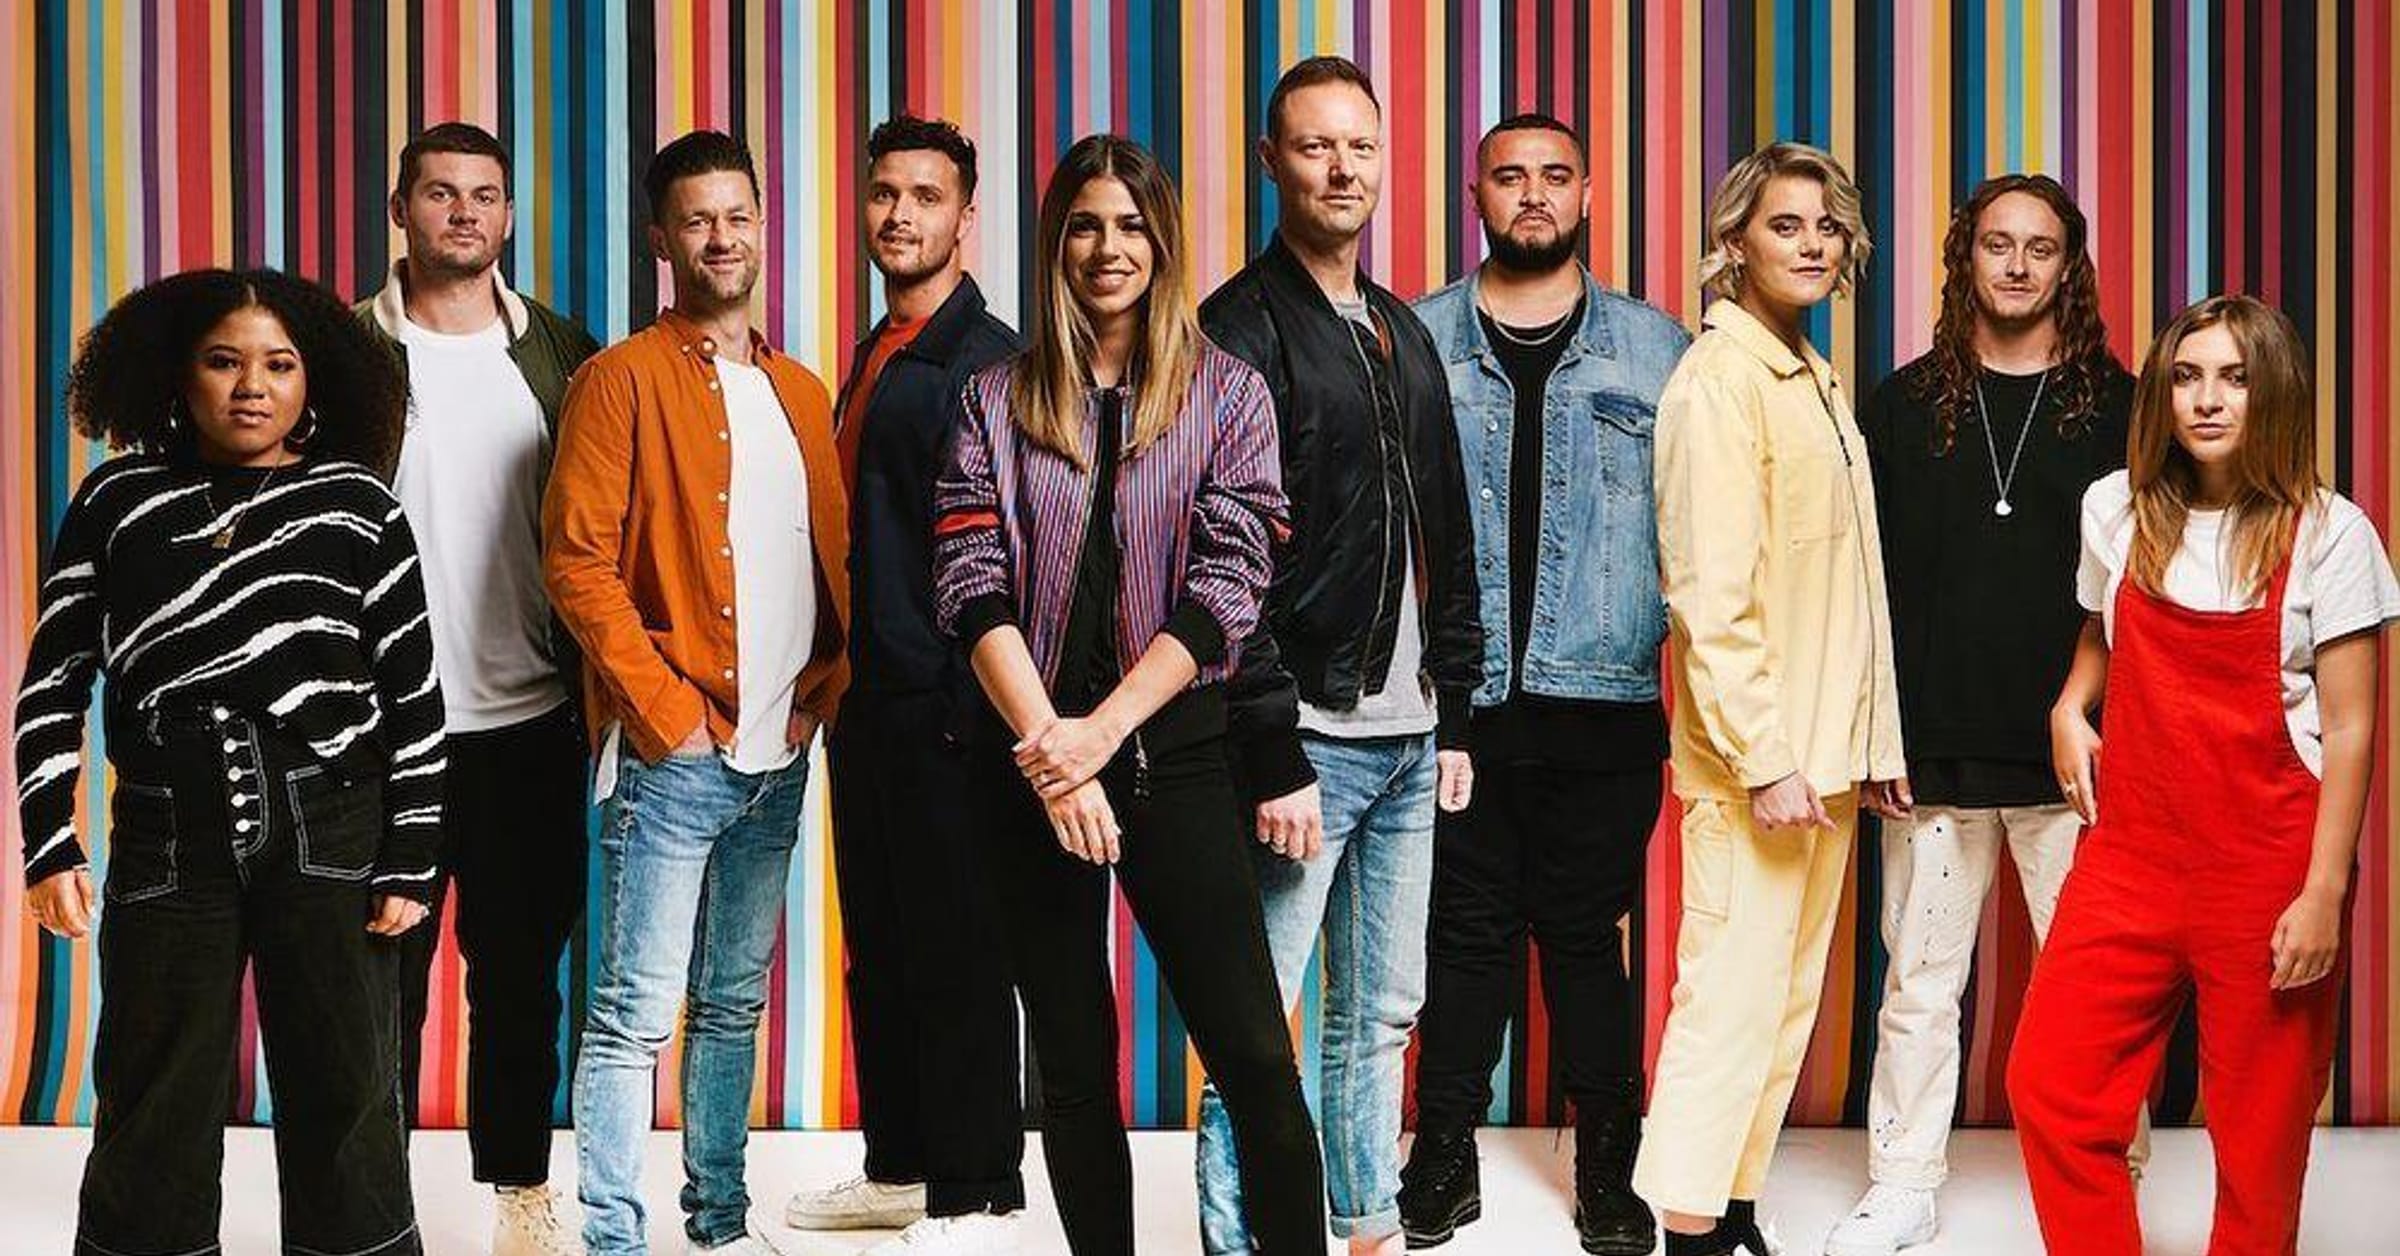 All Former & Current Members of Hillsong Worship, Ranked